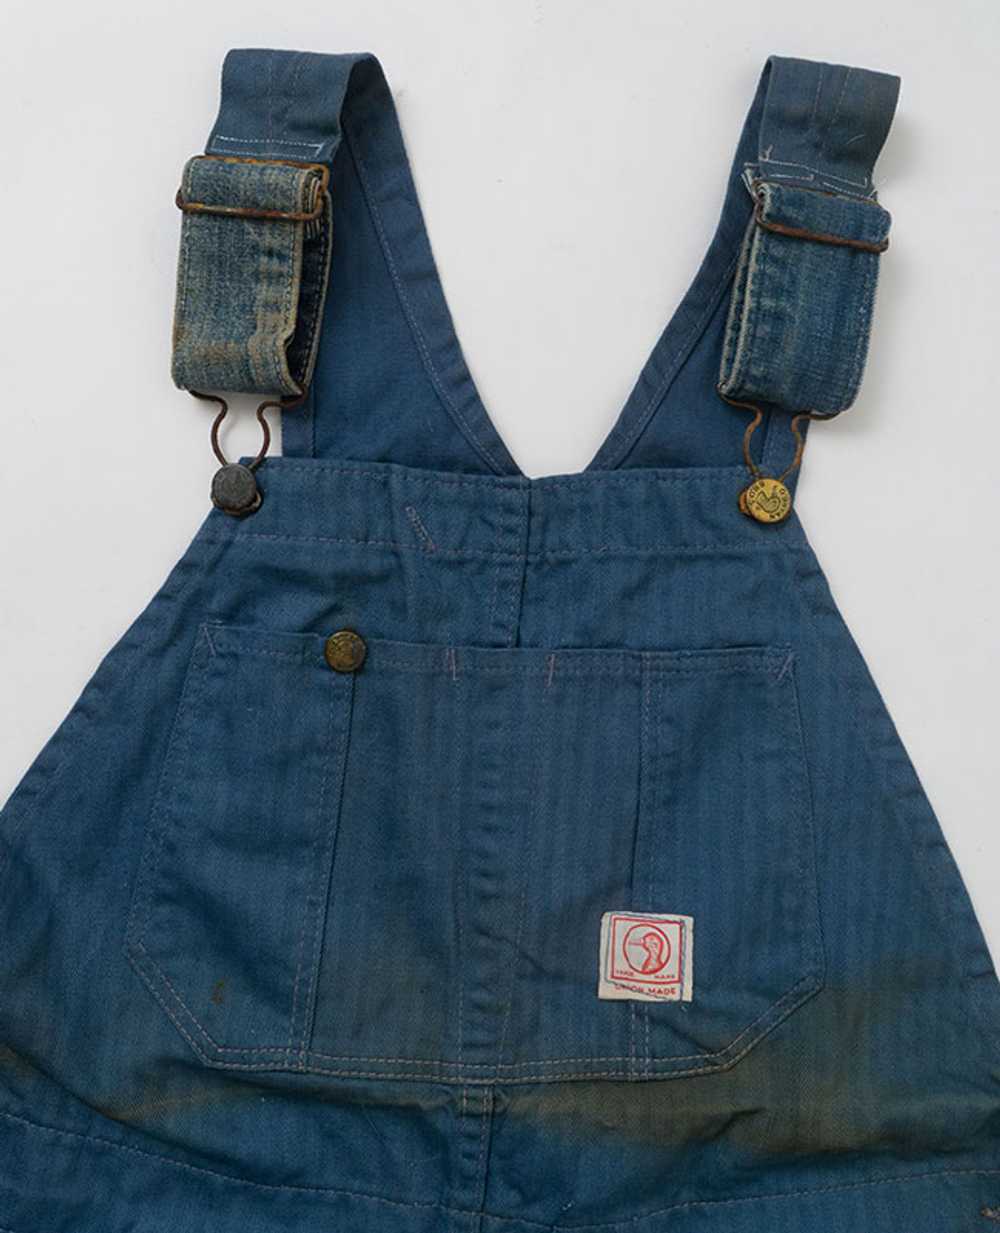 1930s Duck Head Overalls by O'Bryan - image 2